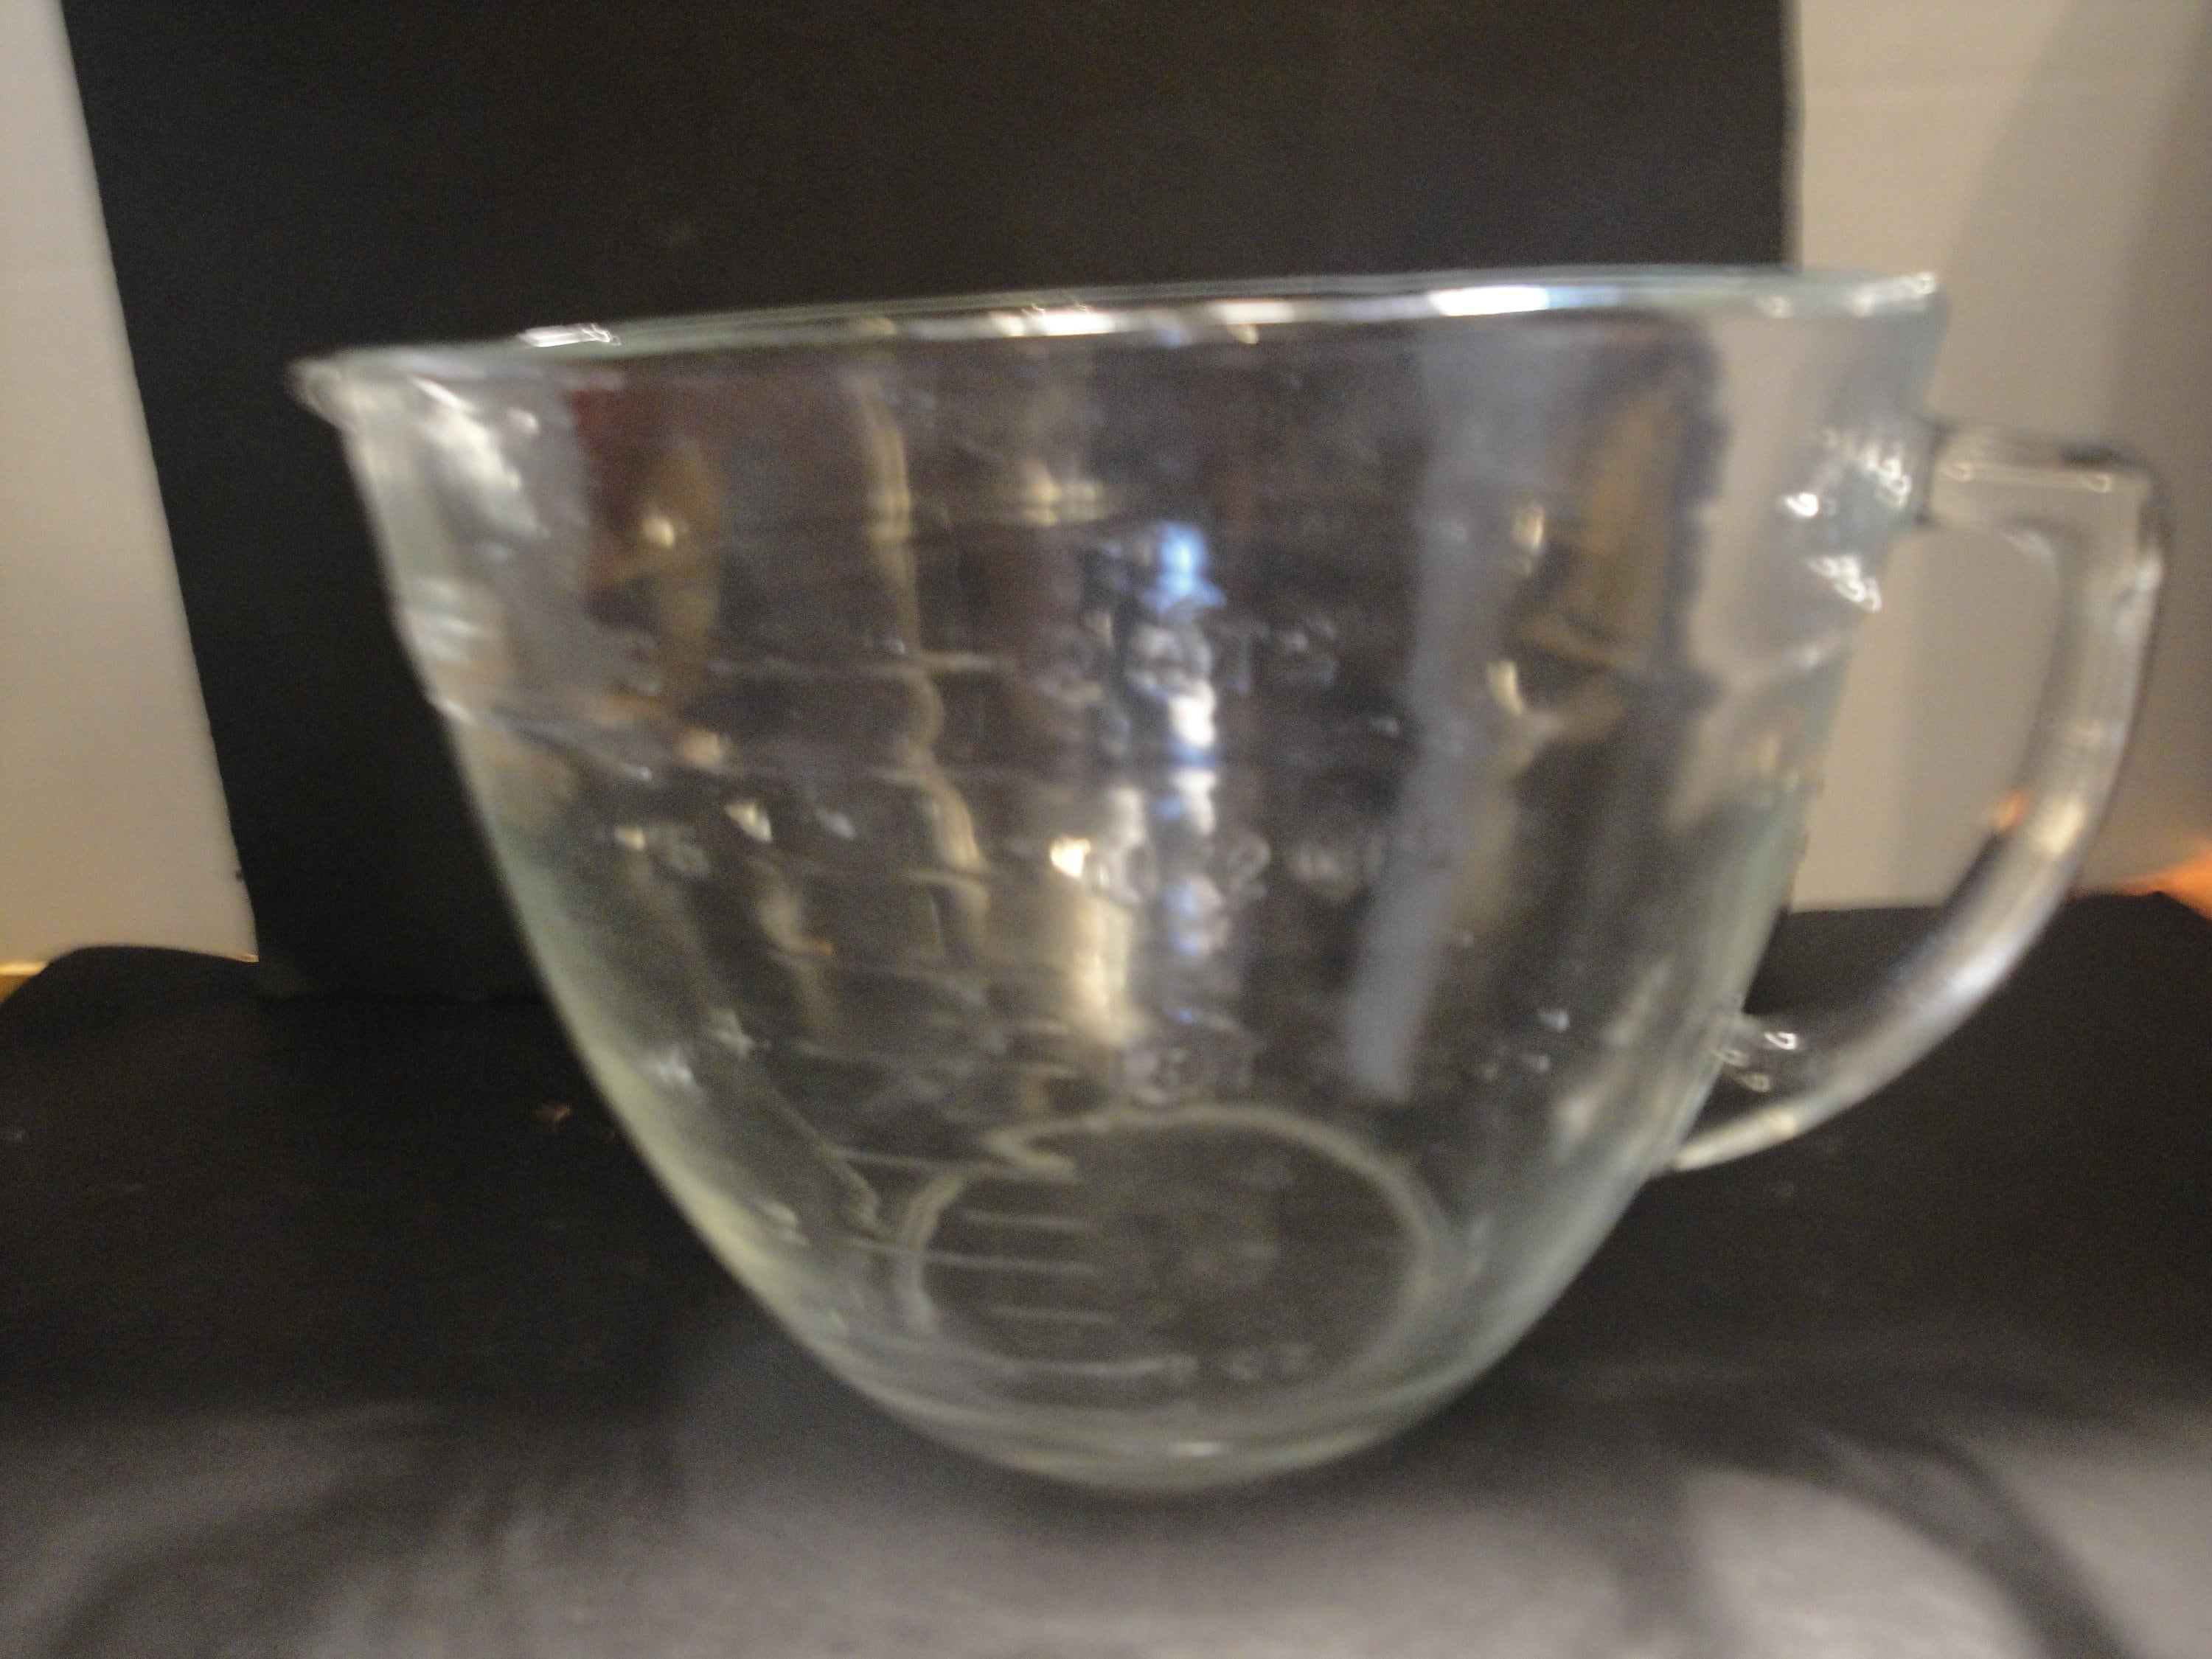 The PAMPERED CHEF Glass Measuring Mixing Batter Bowl No Lid 8 Cup 2 Quart  #88